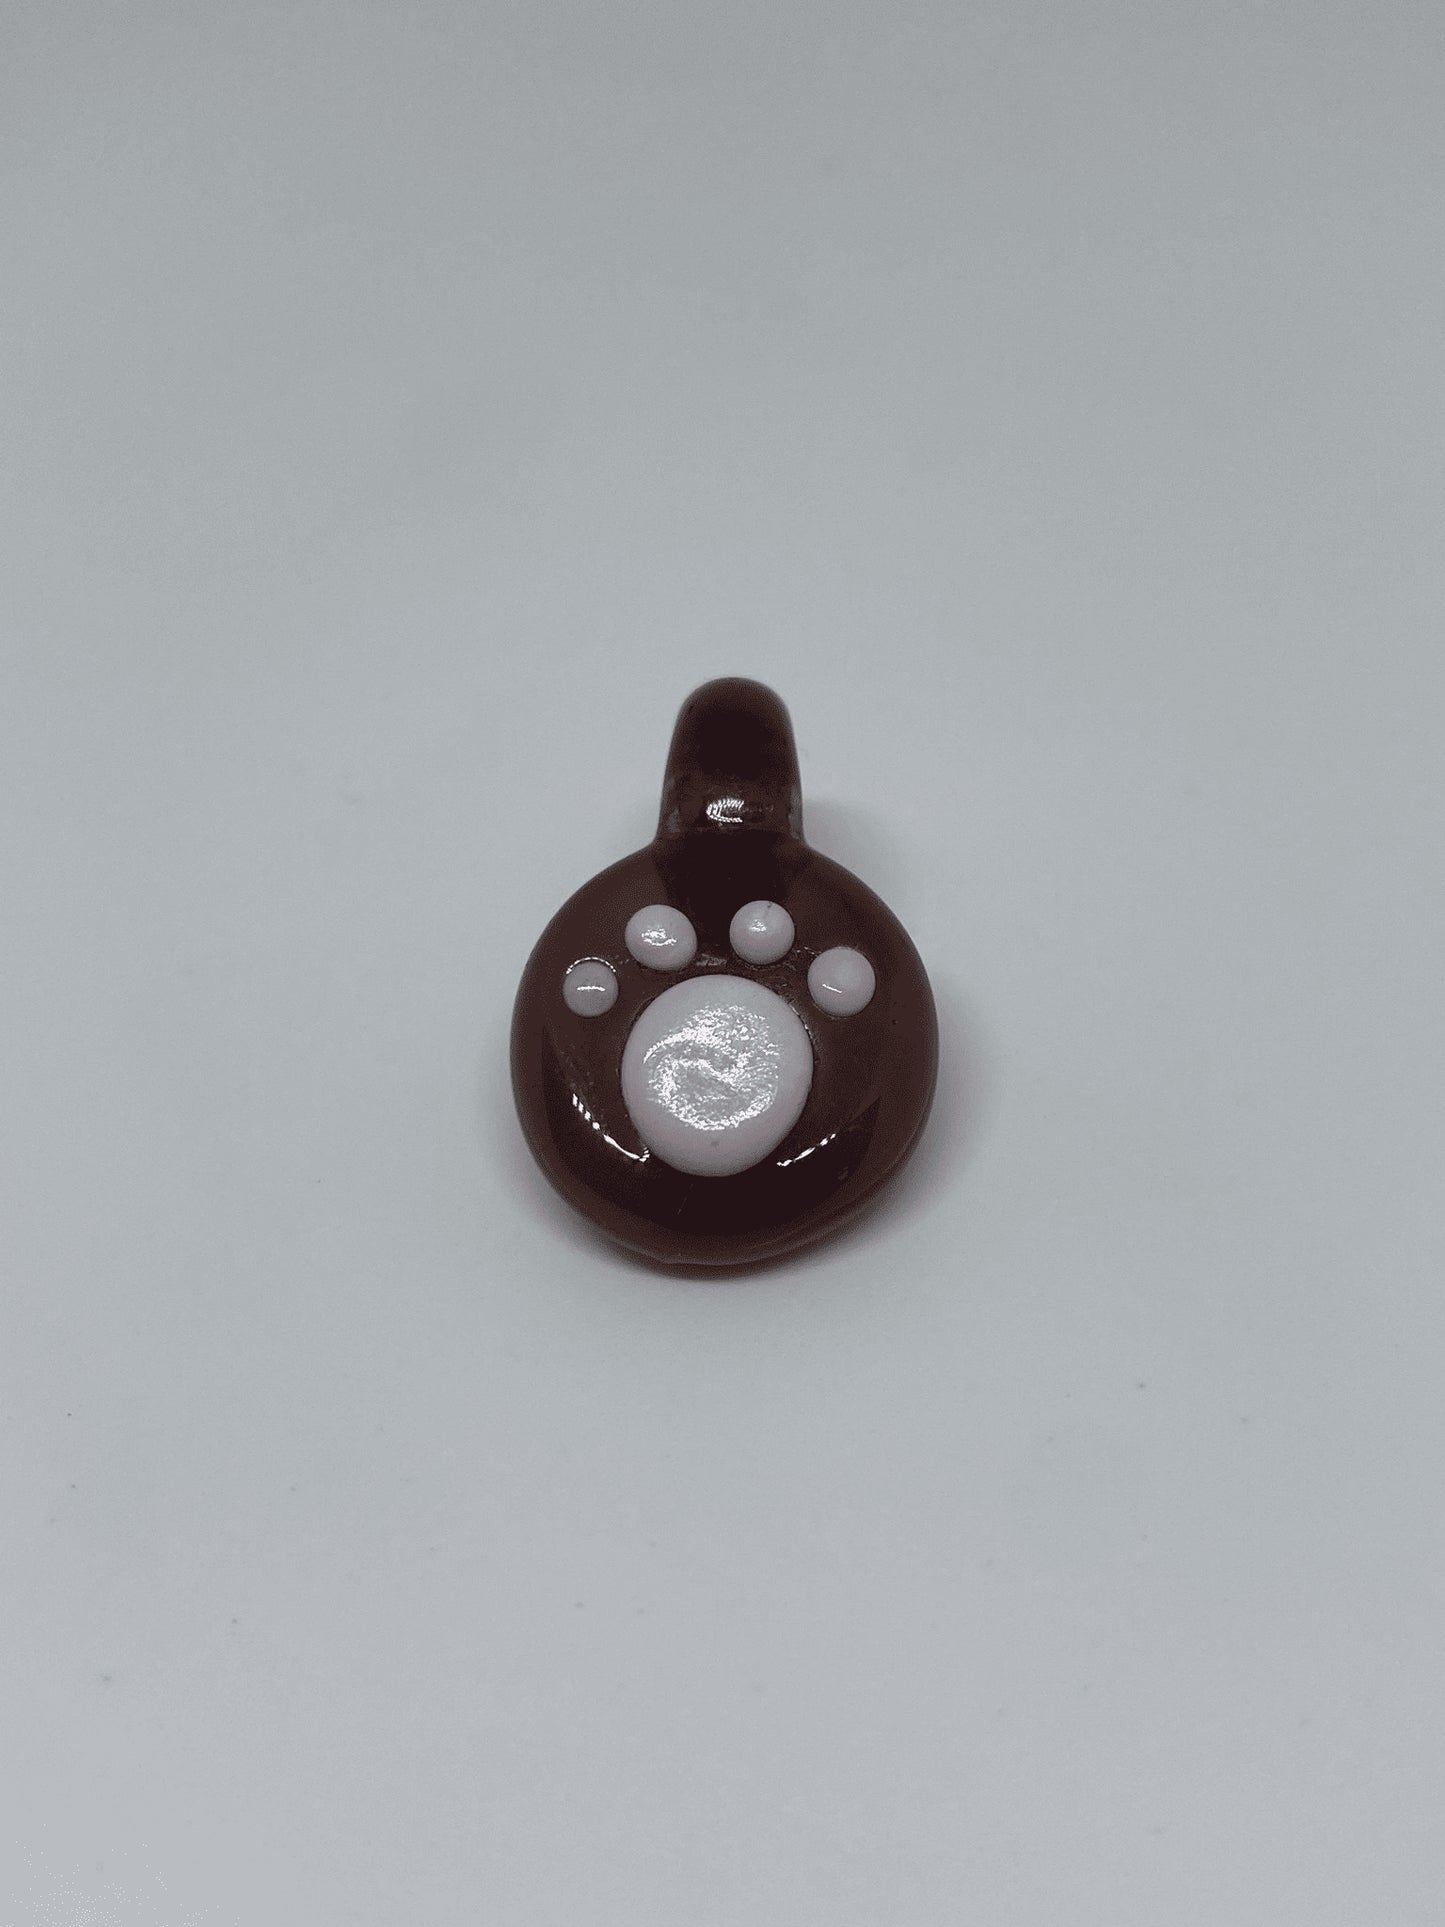 exquisite glass pendant - Maple Syrup Brown Pet Paw Pendant by Alexander The Great Glass